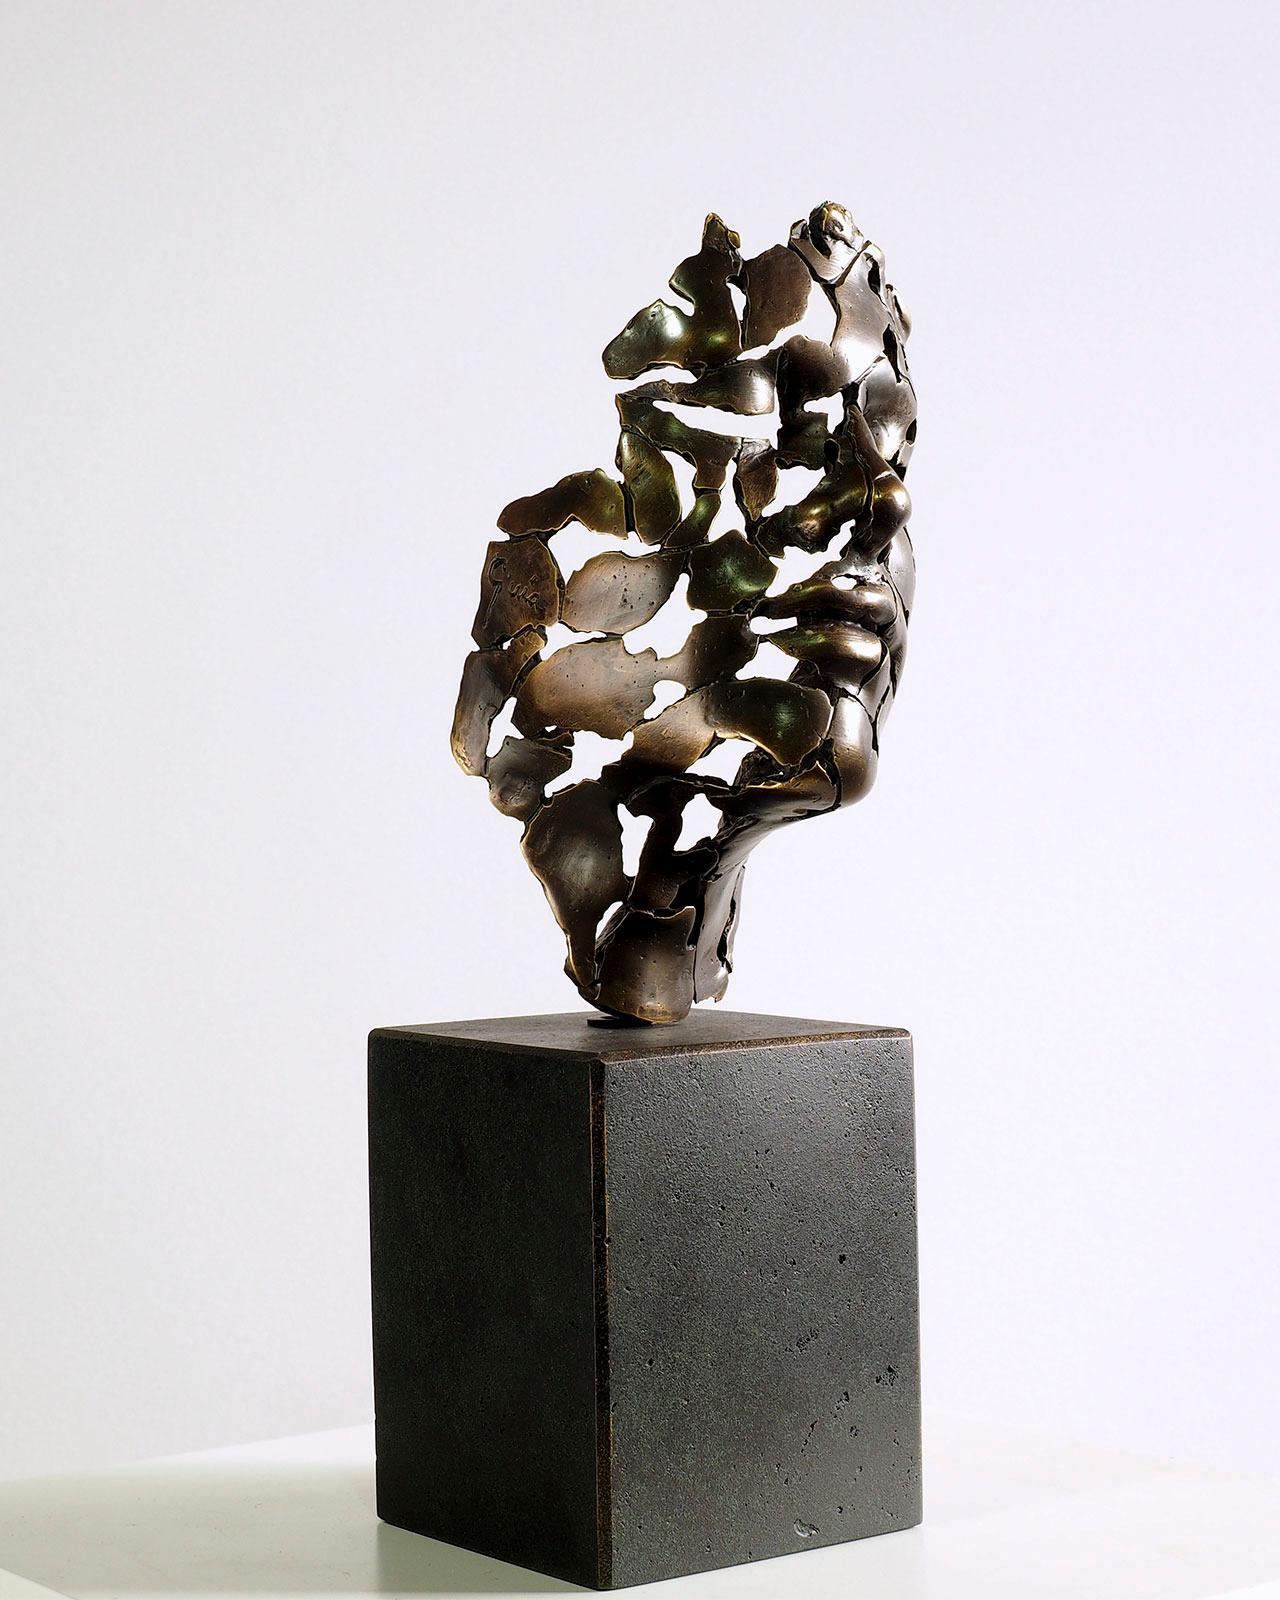 Expressionist Sculpture "The Essence of Youth" by Miguel Guía.
The sculpture is made of a layer of bronze on cold smelting of copper with the base of graphite or marble dust.
Limited edition of 150 works.
Although the required time to deliver a